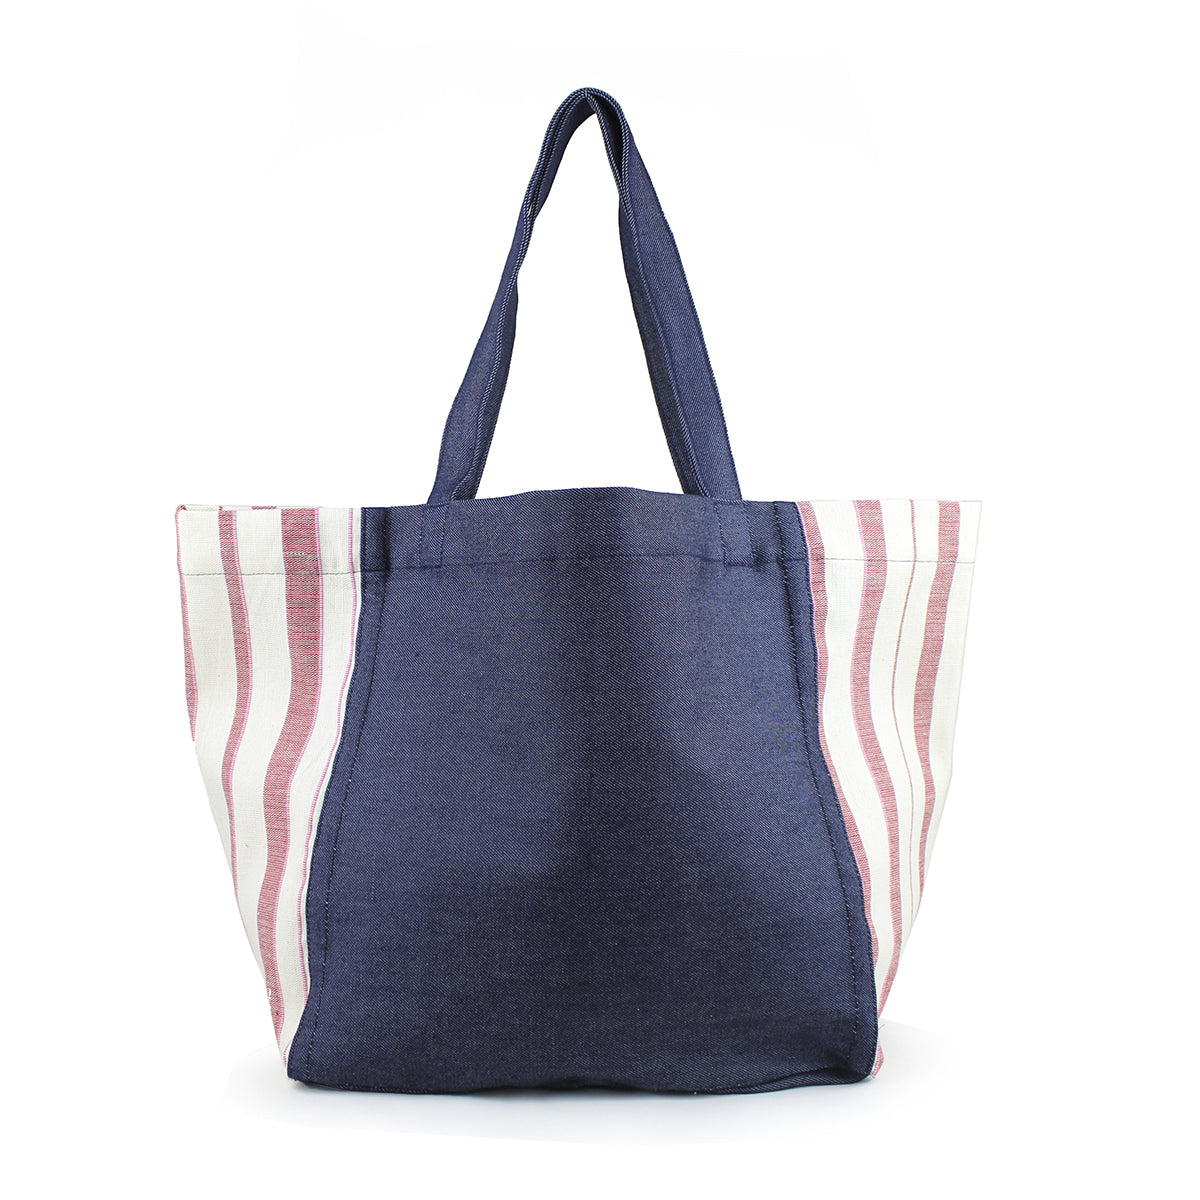 Blanca Handwoven Tote in Denim Sunset Pattern. The Tote has a dark wash denim center and handles. The sides have a triangle finish in a light red and white vertical striped fabric.